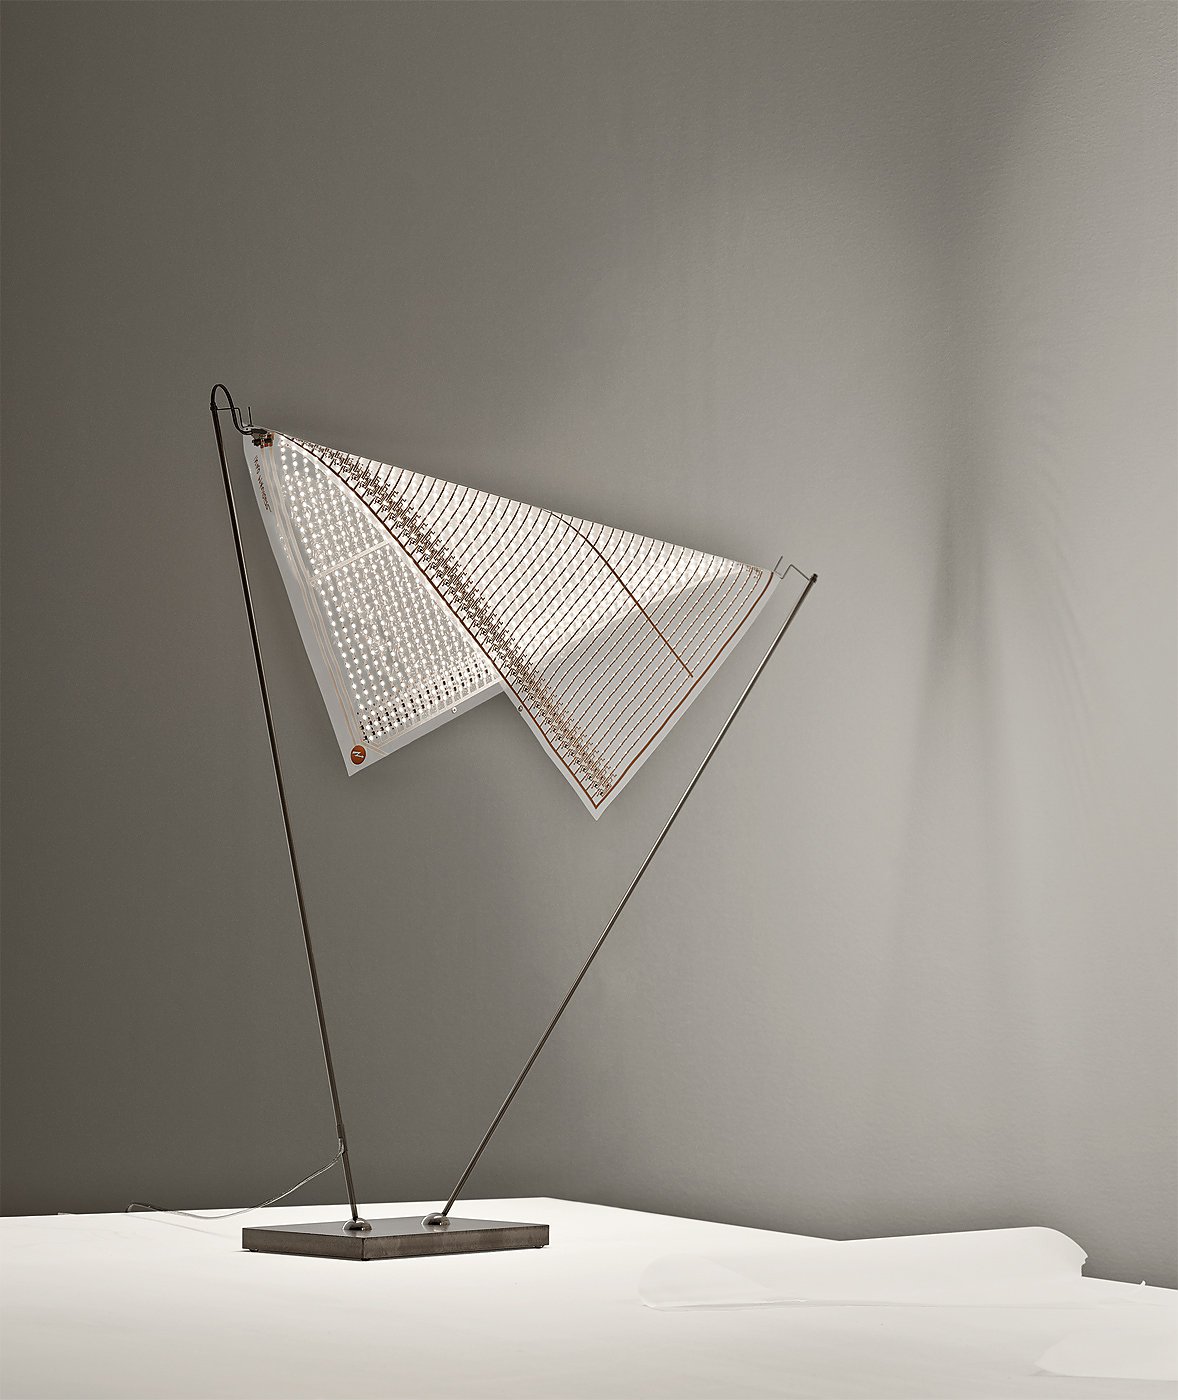 An LED Lamp That Floats Like A Sheet Of Paper